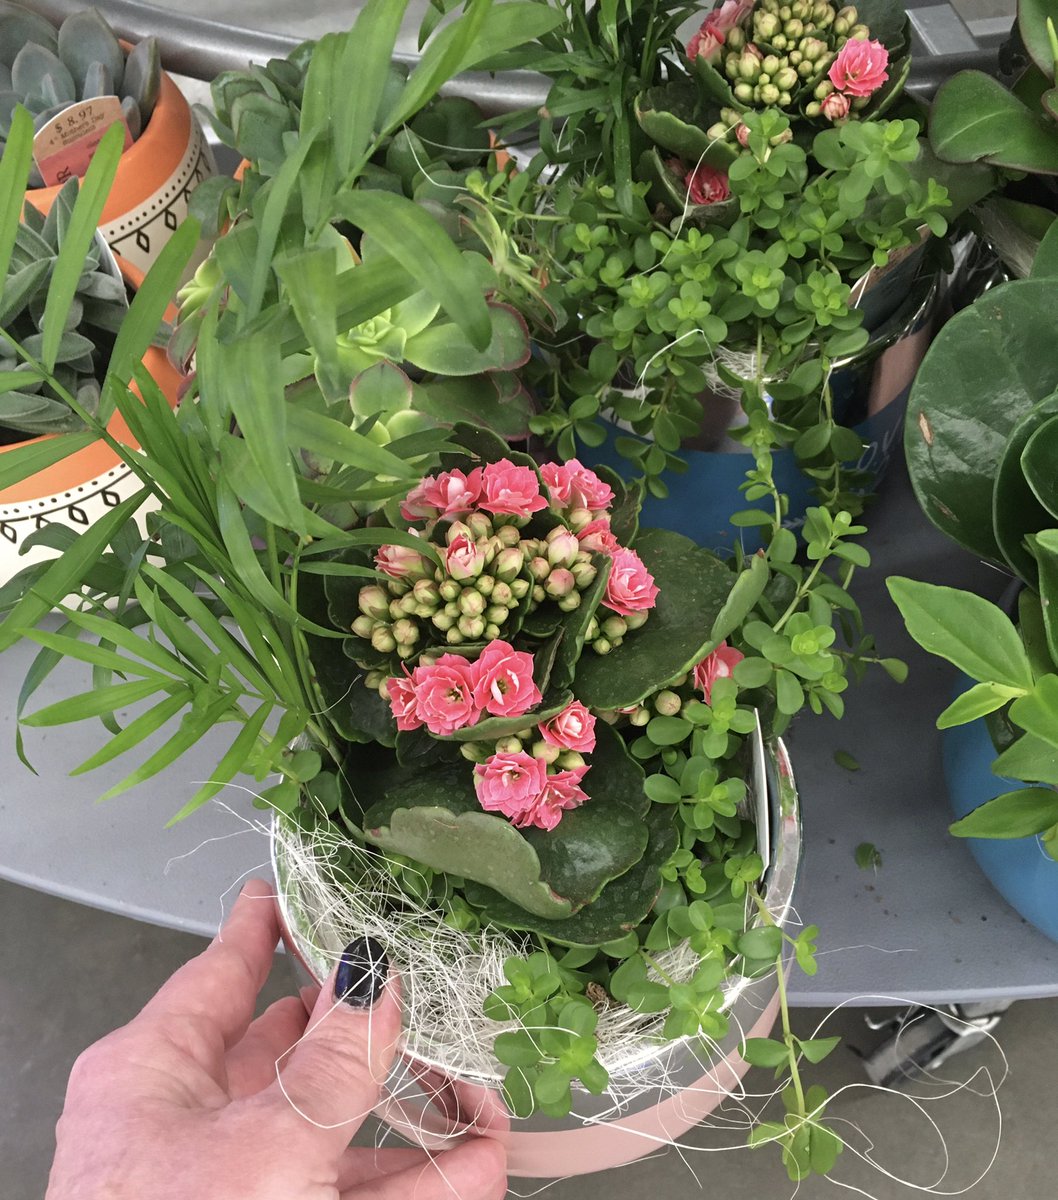 Frequently seen in basket or dish arrangements.Picture is a small dish garden containing a Kalanchoe with pink flowers, a small palm plant and a trailing peperomia, I think.